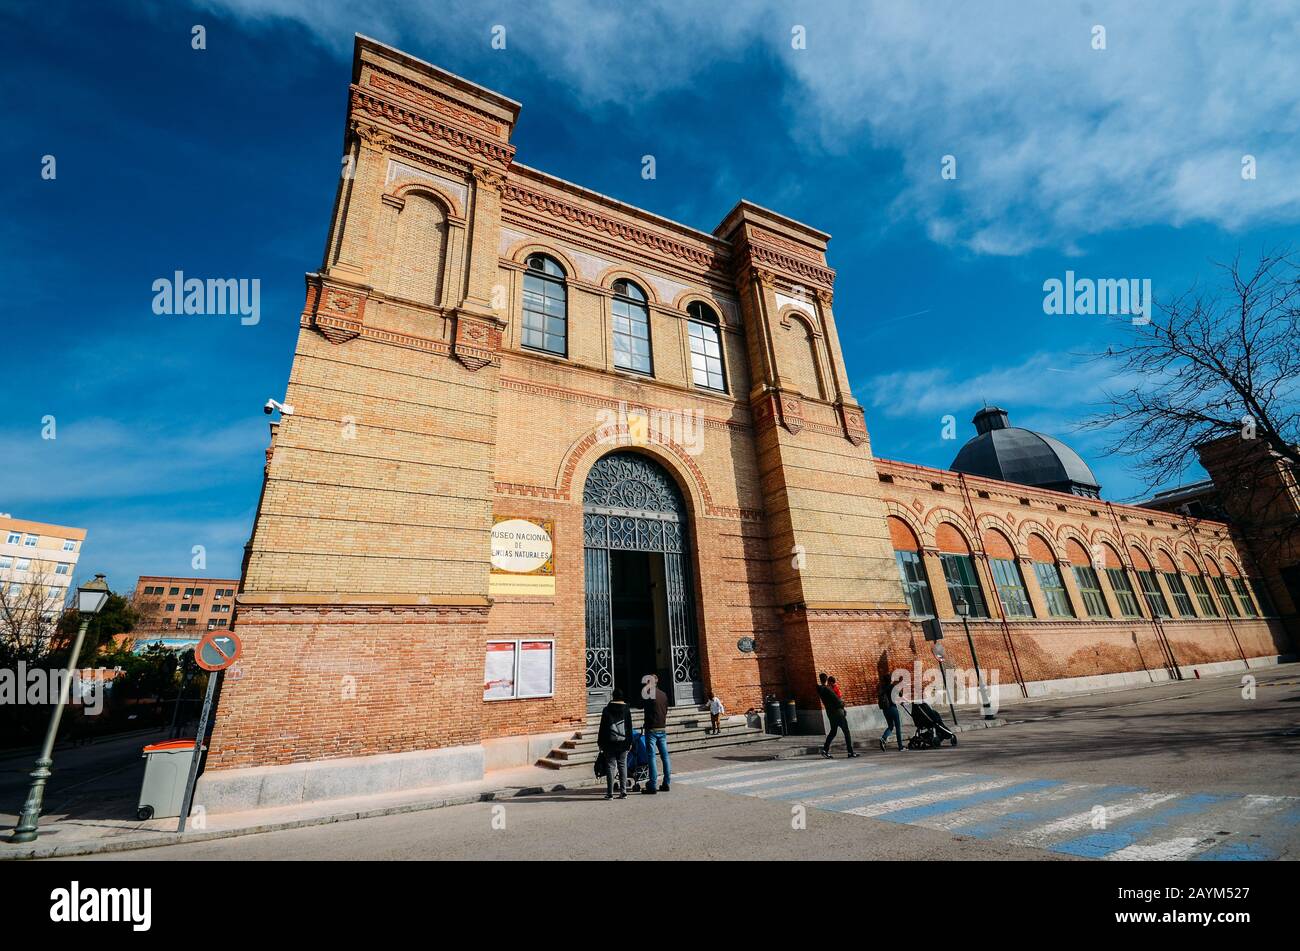 Madrid, Spain - February 15, 2020: National Museum of Natural Sciences at Paseo de la Castellana street in City of Madrid, Spain Stock Photo